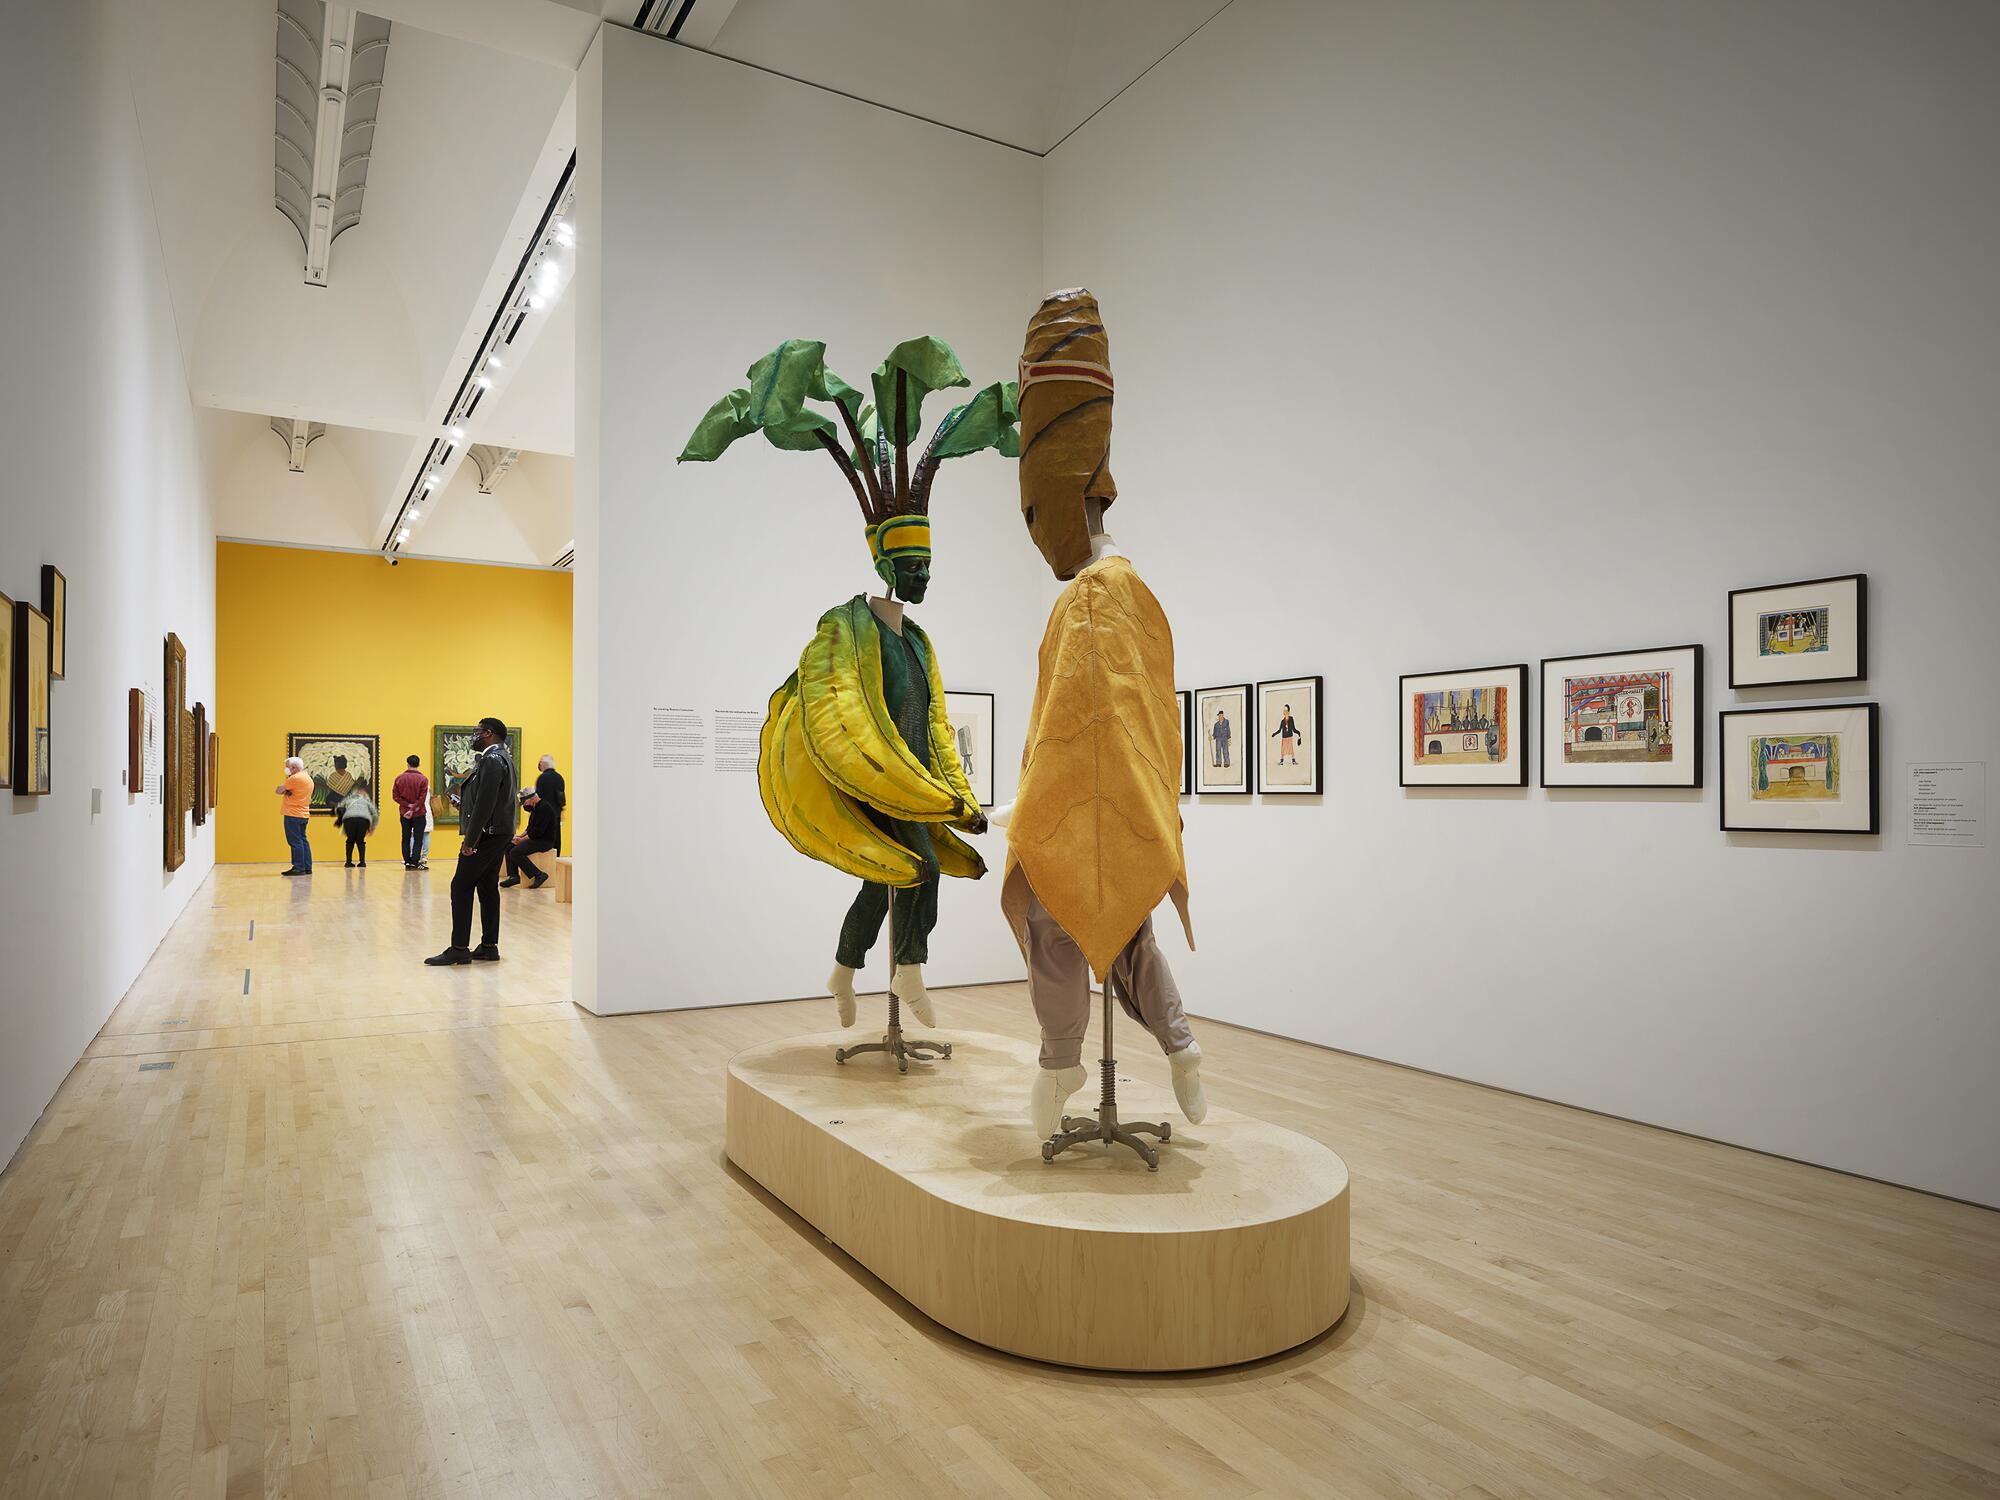 A gallery view shows a banana costume and a cigar costume on a plinth before a wall of drawings by Diego Rivera